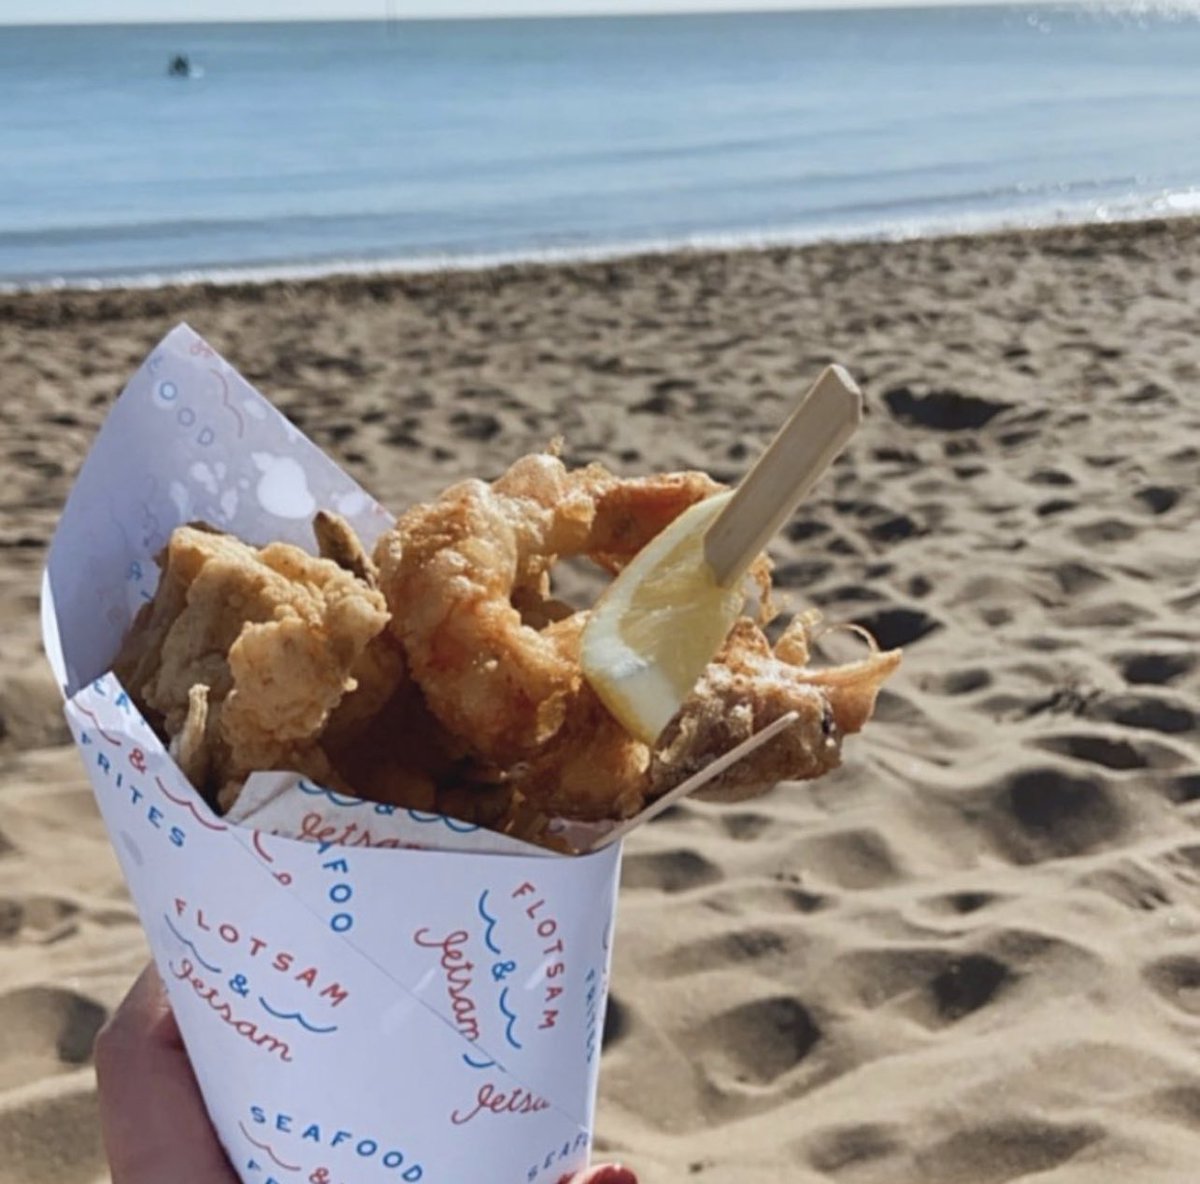 A CONE OF FRITTO MISTO.......Where it all started for us.  Open from 11.30am!
❤️🤍💙
#Kentcoast #fishandchipsonthebeach #kentfood #fishandchips #broadstairs #margate #thanetfood #seafood #seafoodandfrites #ramsgate #vikingbay #seasideliving #ramsgate #frittomisto #lobsterandchips